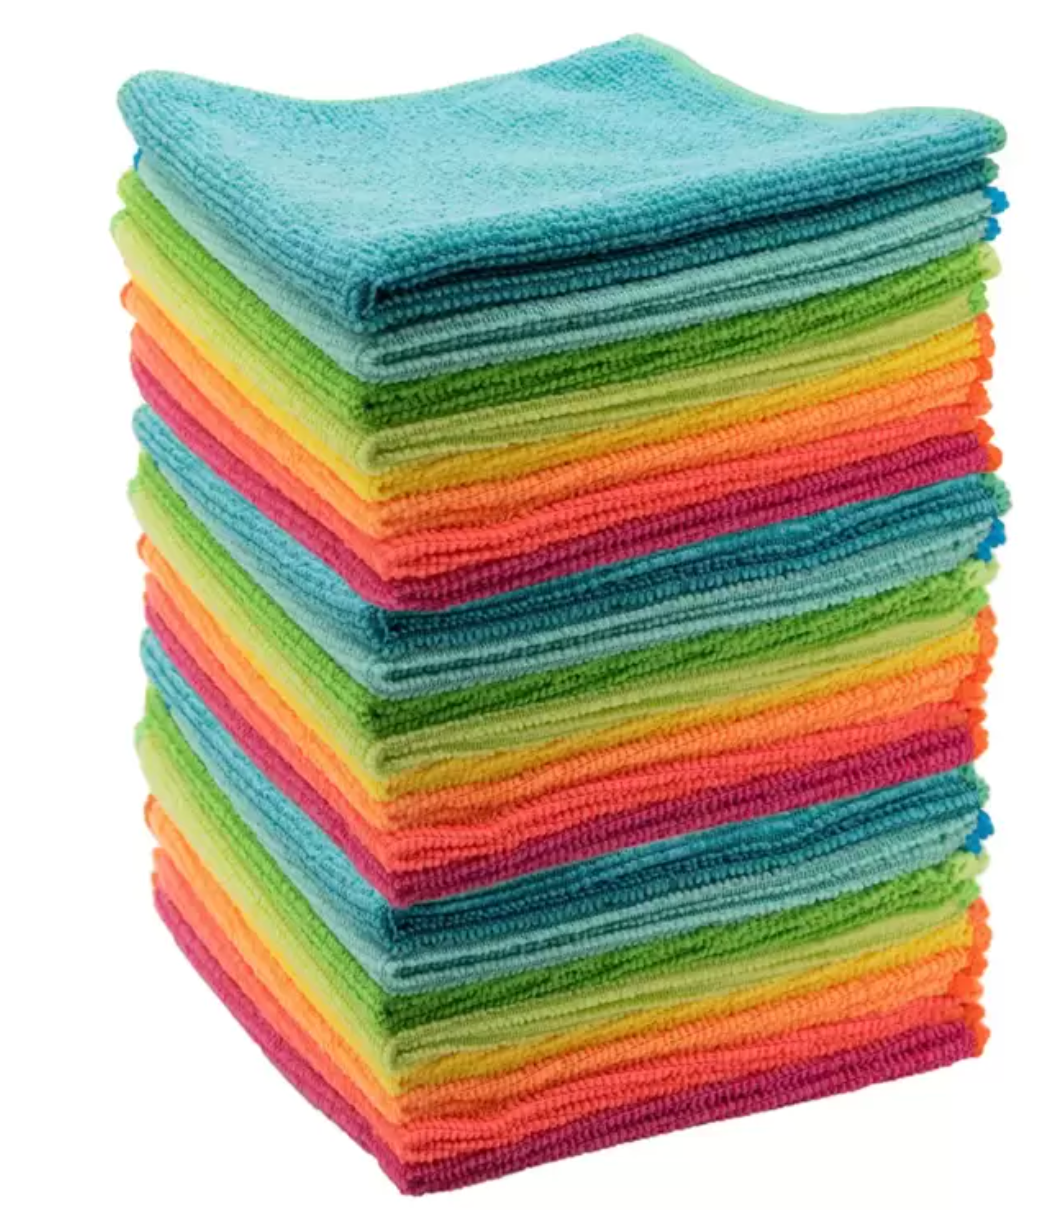 Spontex Microfibre Cloths, 24 Pack: Premium Cleaning Essentials for Every Task